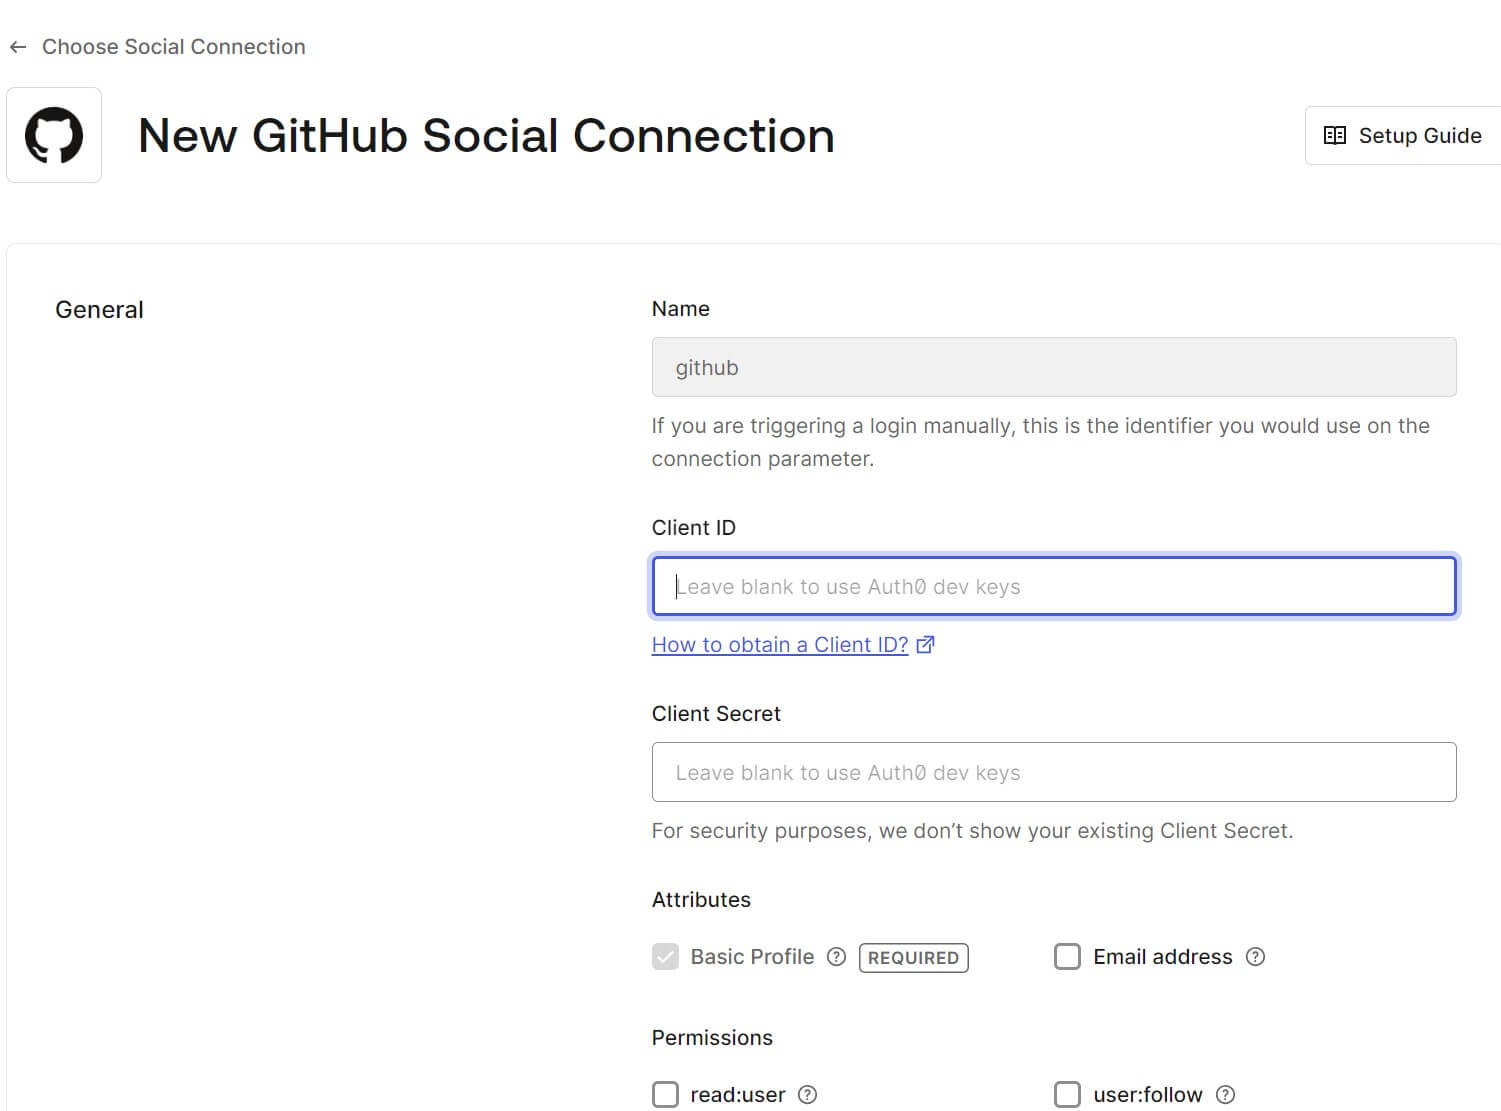 Easy Guide to Nest.js with Auth0 and Passport JWT|AuthGuard